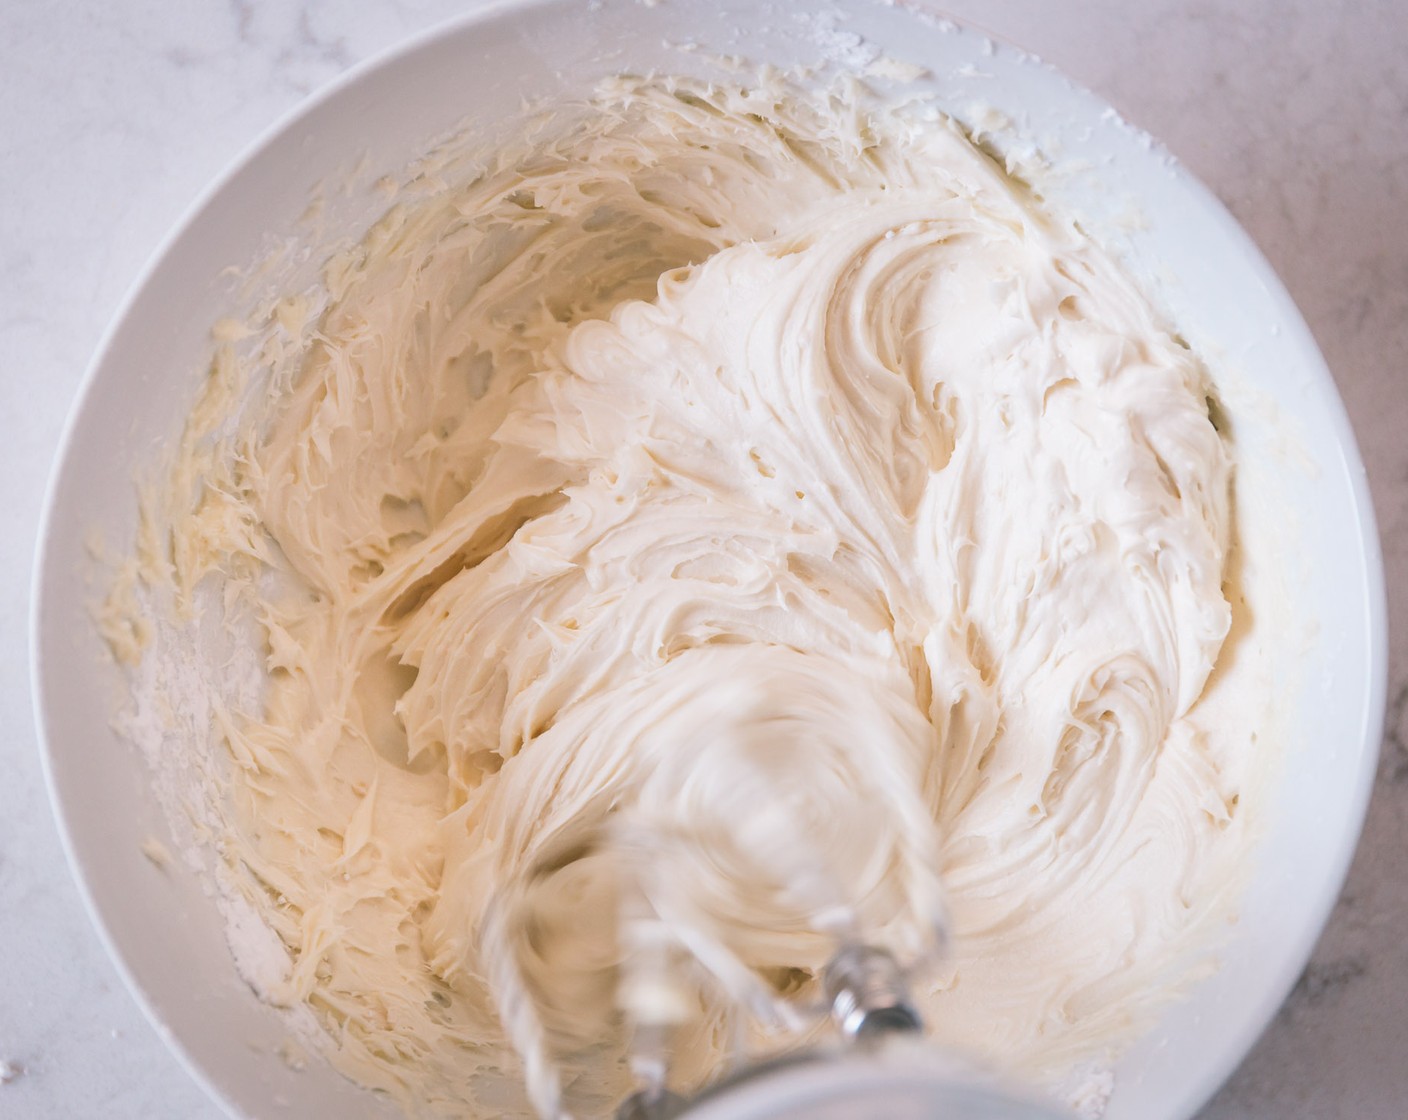 step 13 In a standing mixer, cream the Cream Cheese (1/2 cup) and Butter (1/4 cup) together until smooth. Add the Powdered Confectioners Sugar (2 cups) and Vanilla Extract (1 tsp) and beat until a smooth frosting appears. Place into a large zip lock bag and cut the corner off one of the edges.